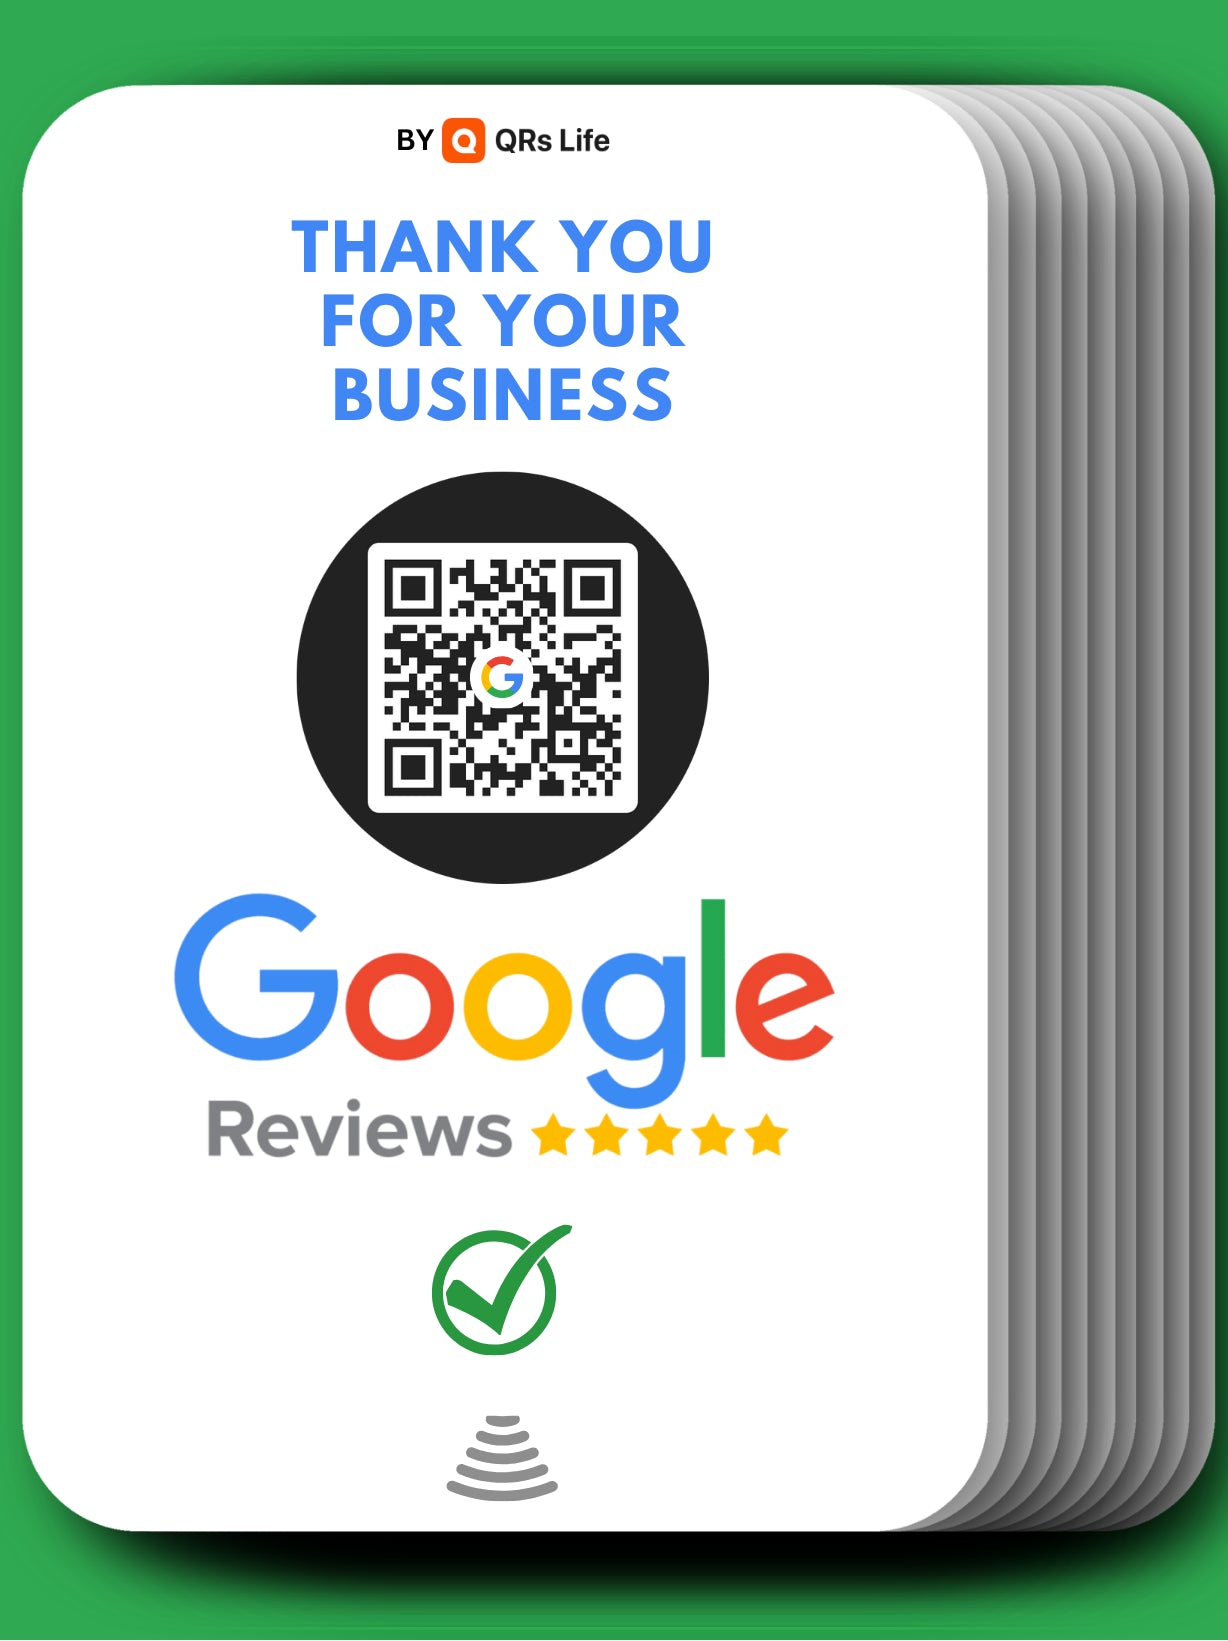 10x Google review cards